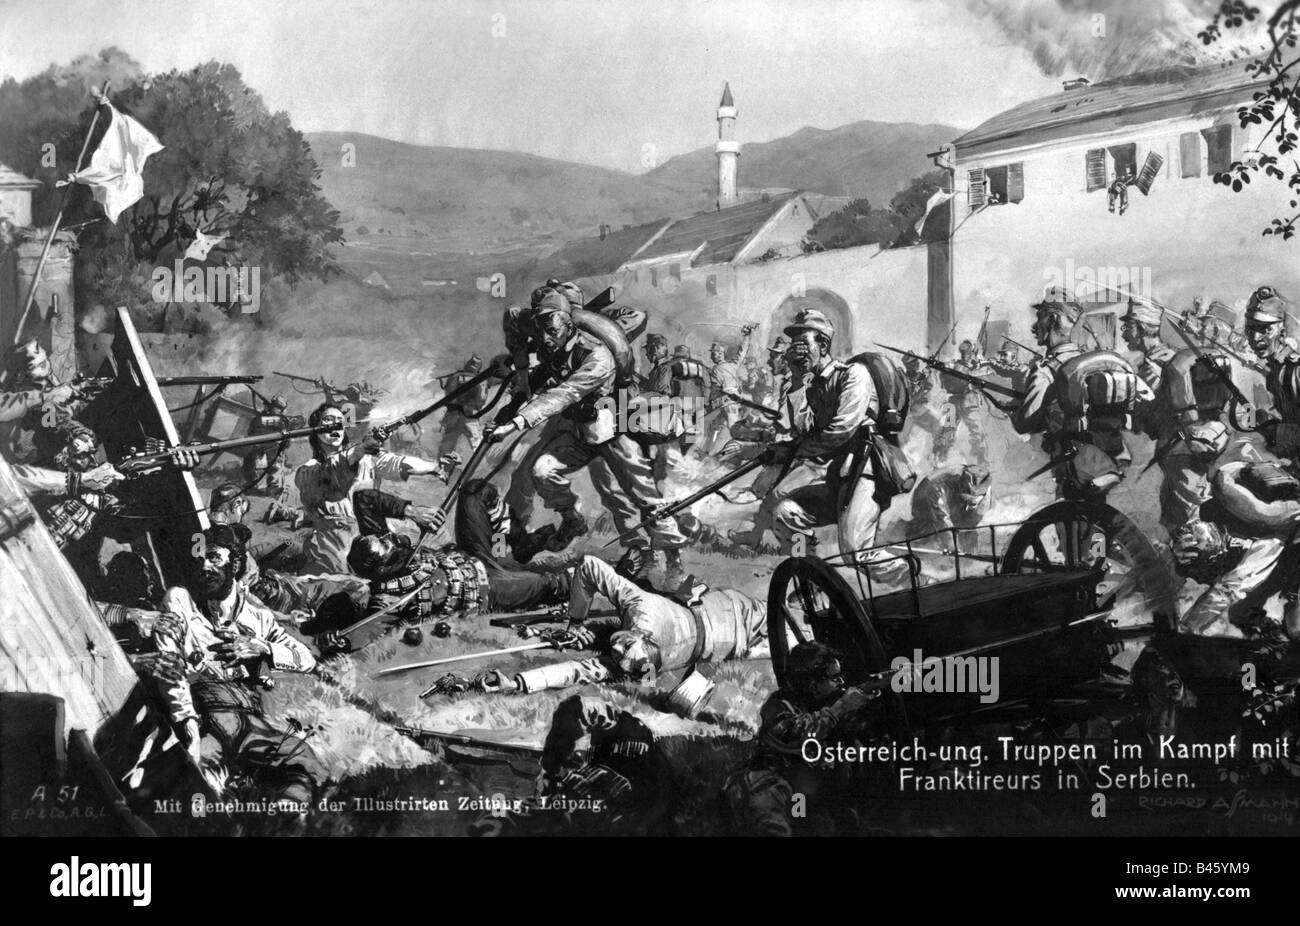 events, First World War / WWI, Balkans, Serbia, Austrian infantry fighting Serbian franctireurs, postcard, drawing by Wilhelm Gause, August 1914, Stock Photo